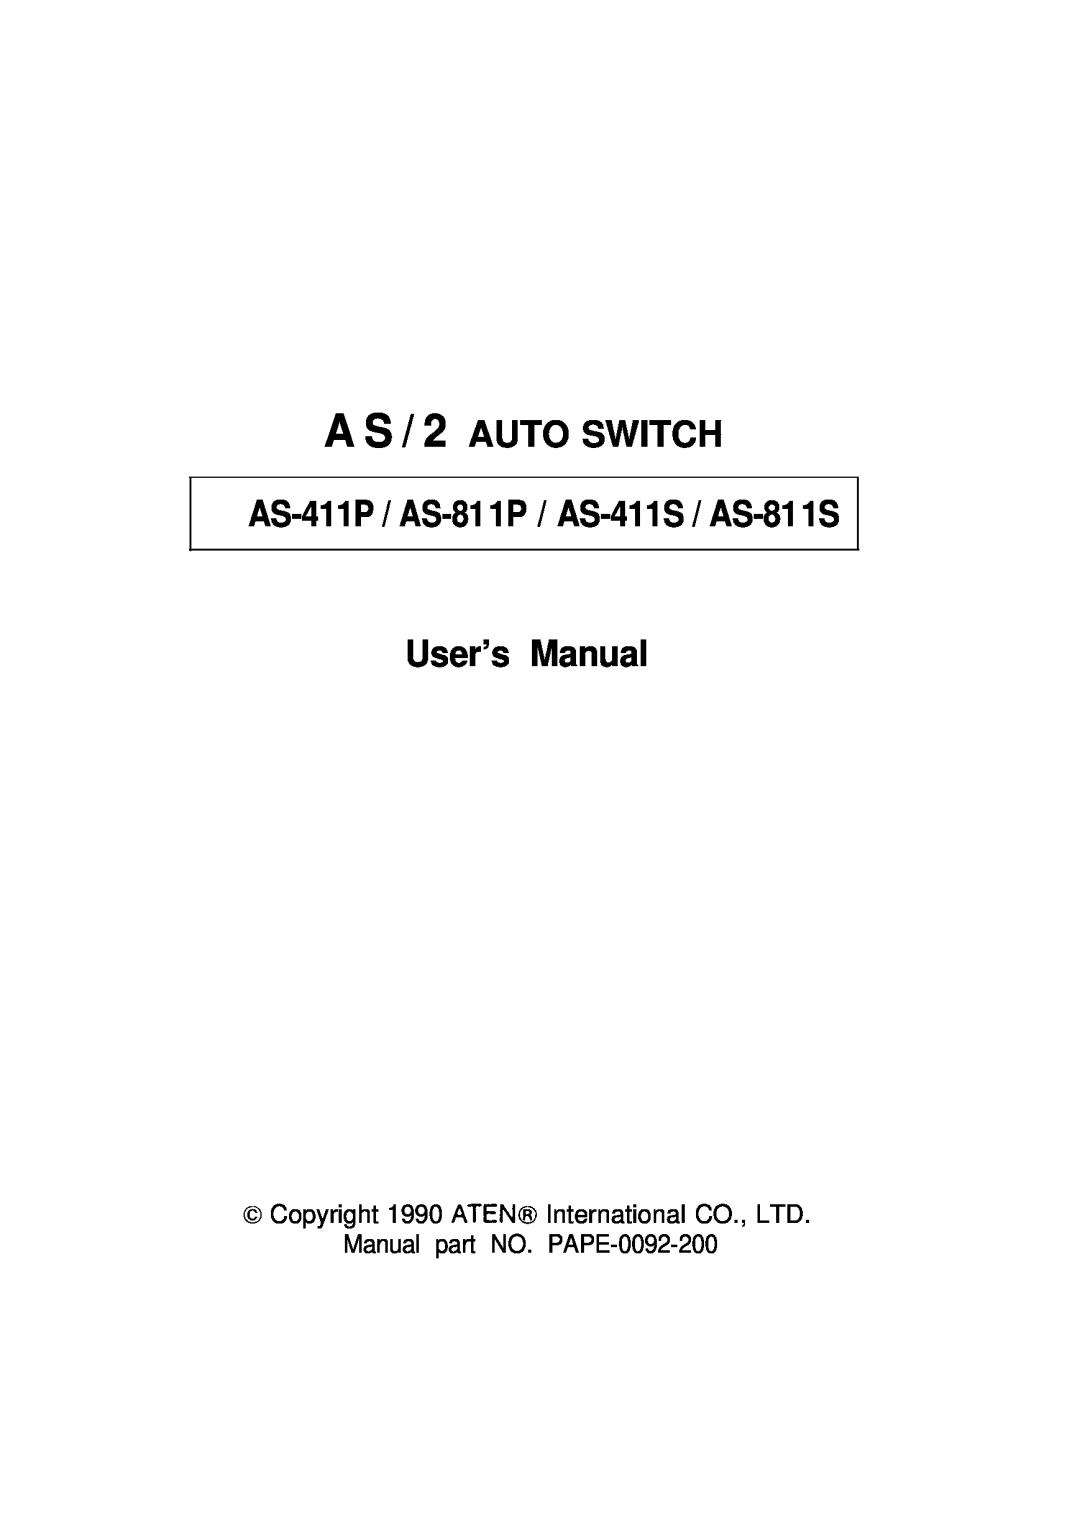 ATEN Technology user manual A S / 2 AUTO SWITCH AS-411P / AS-811P / AS-411S / AS-811S, User’s Manual 